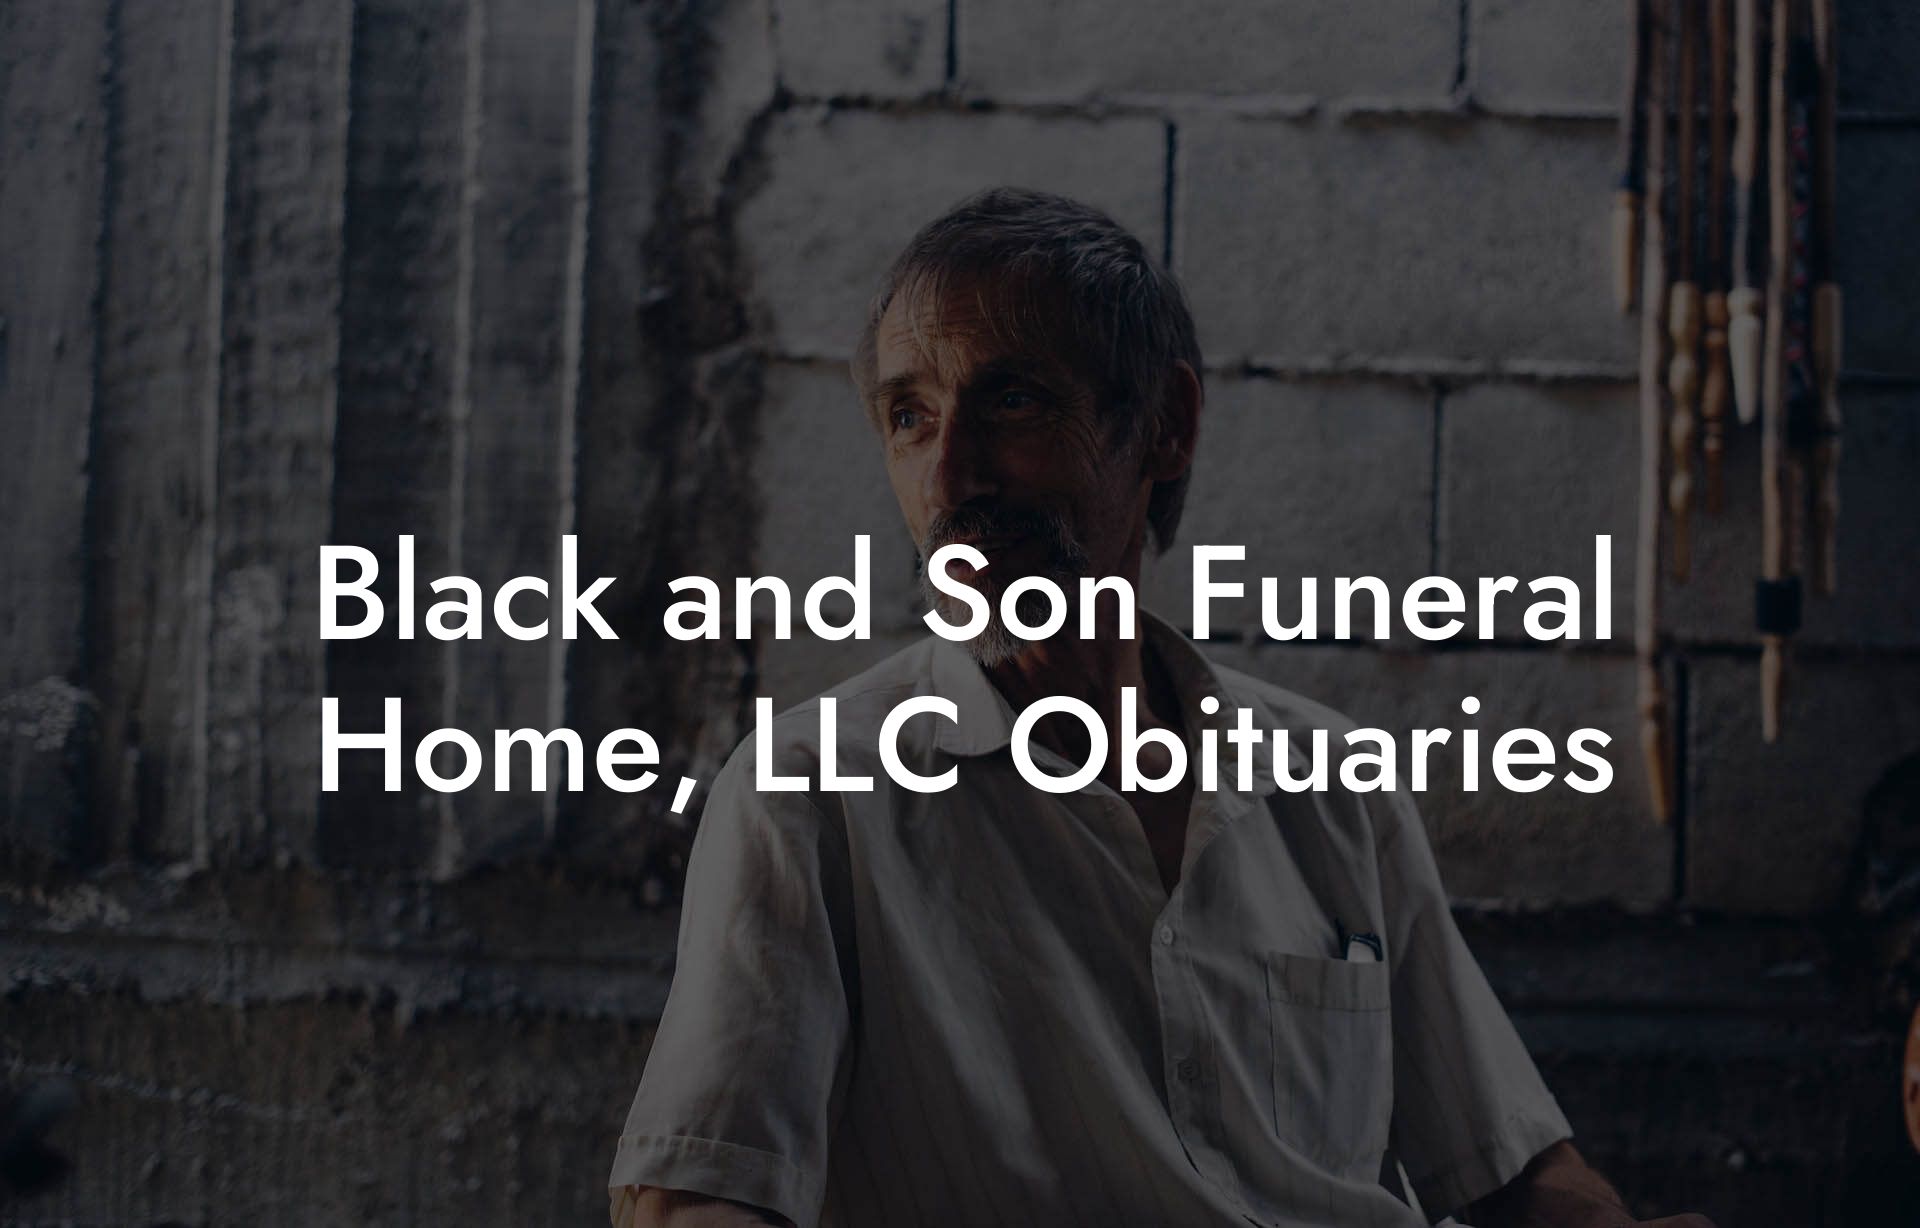 Black and Son Funeral Home, LLC Obituaries